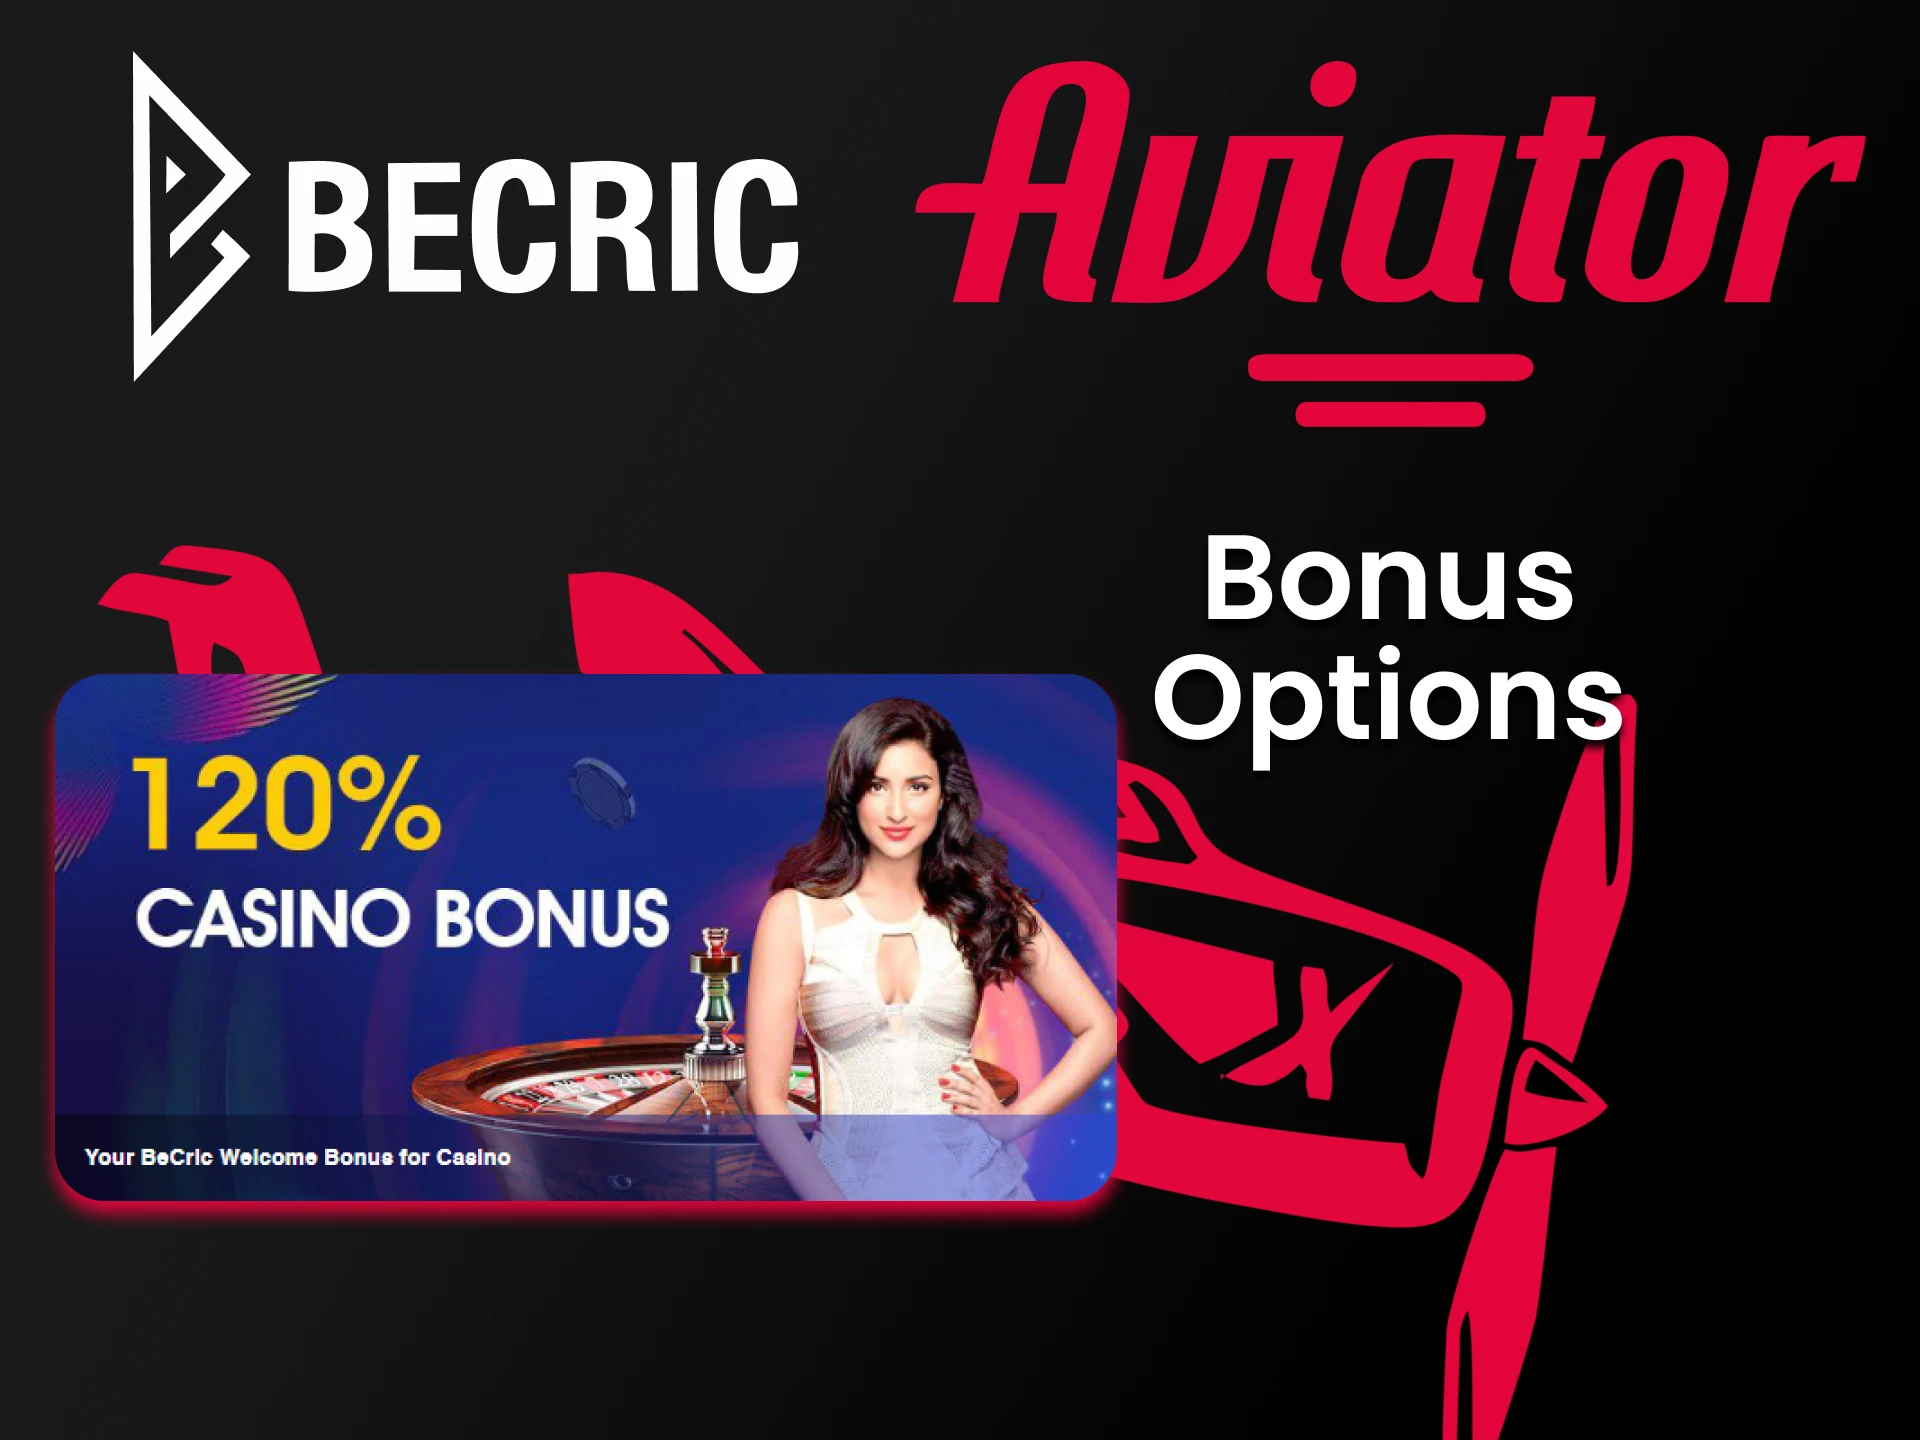 Get a bonus from Becric for victories in the game Aviator.